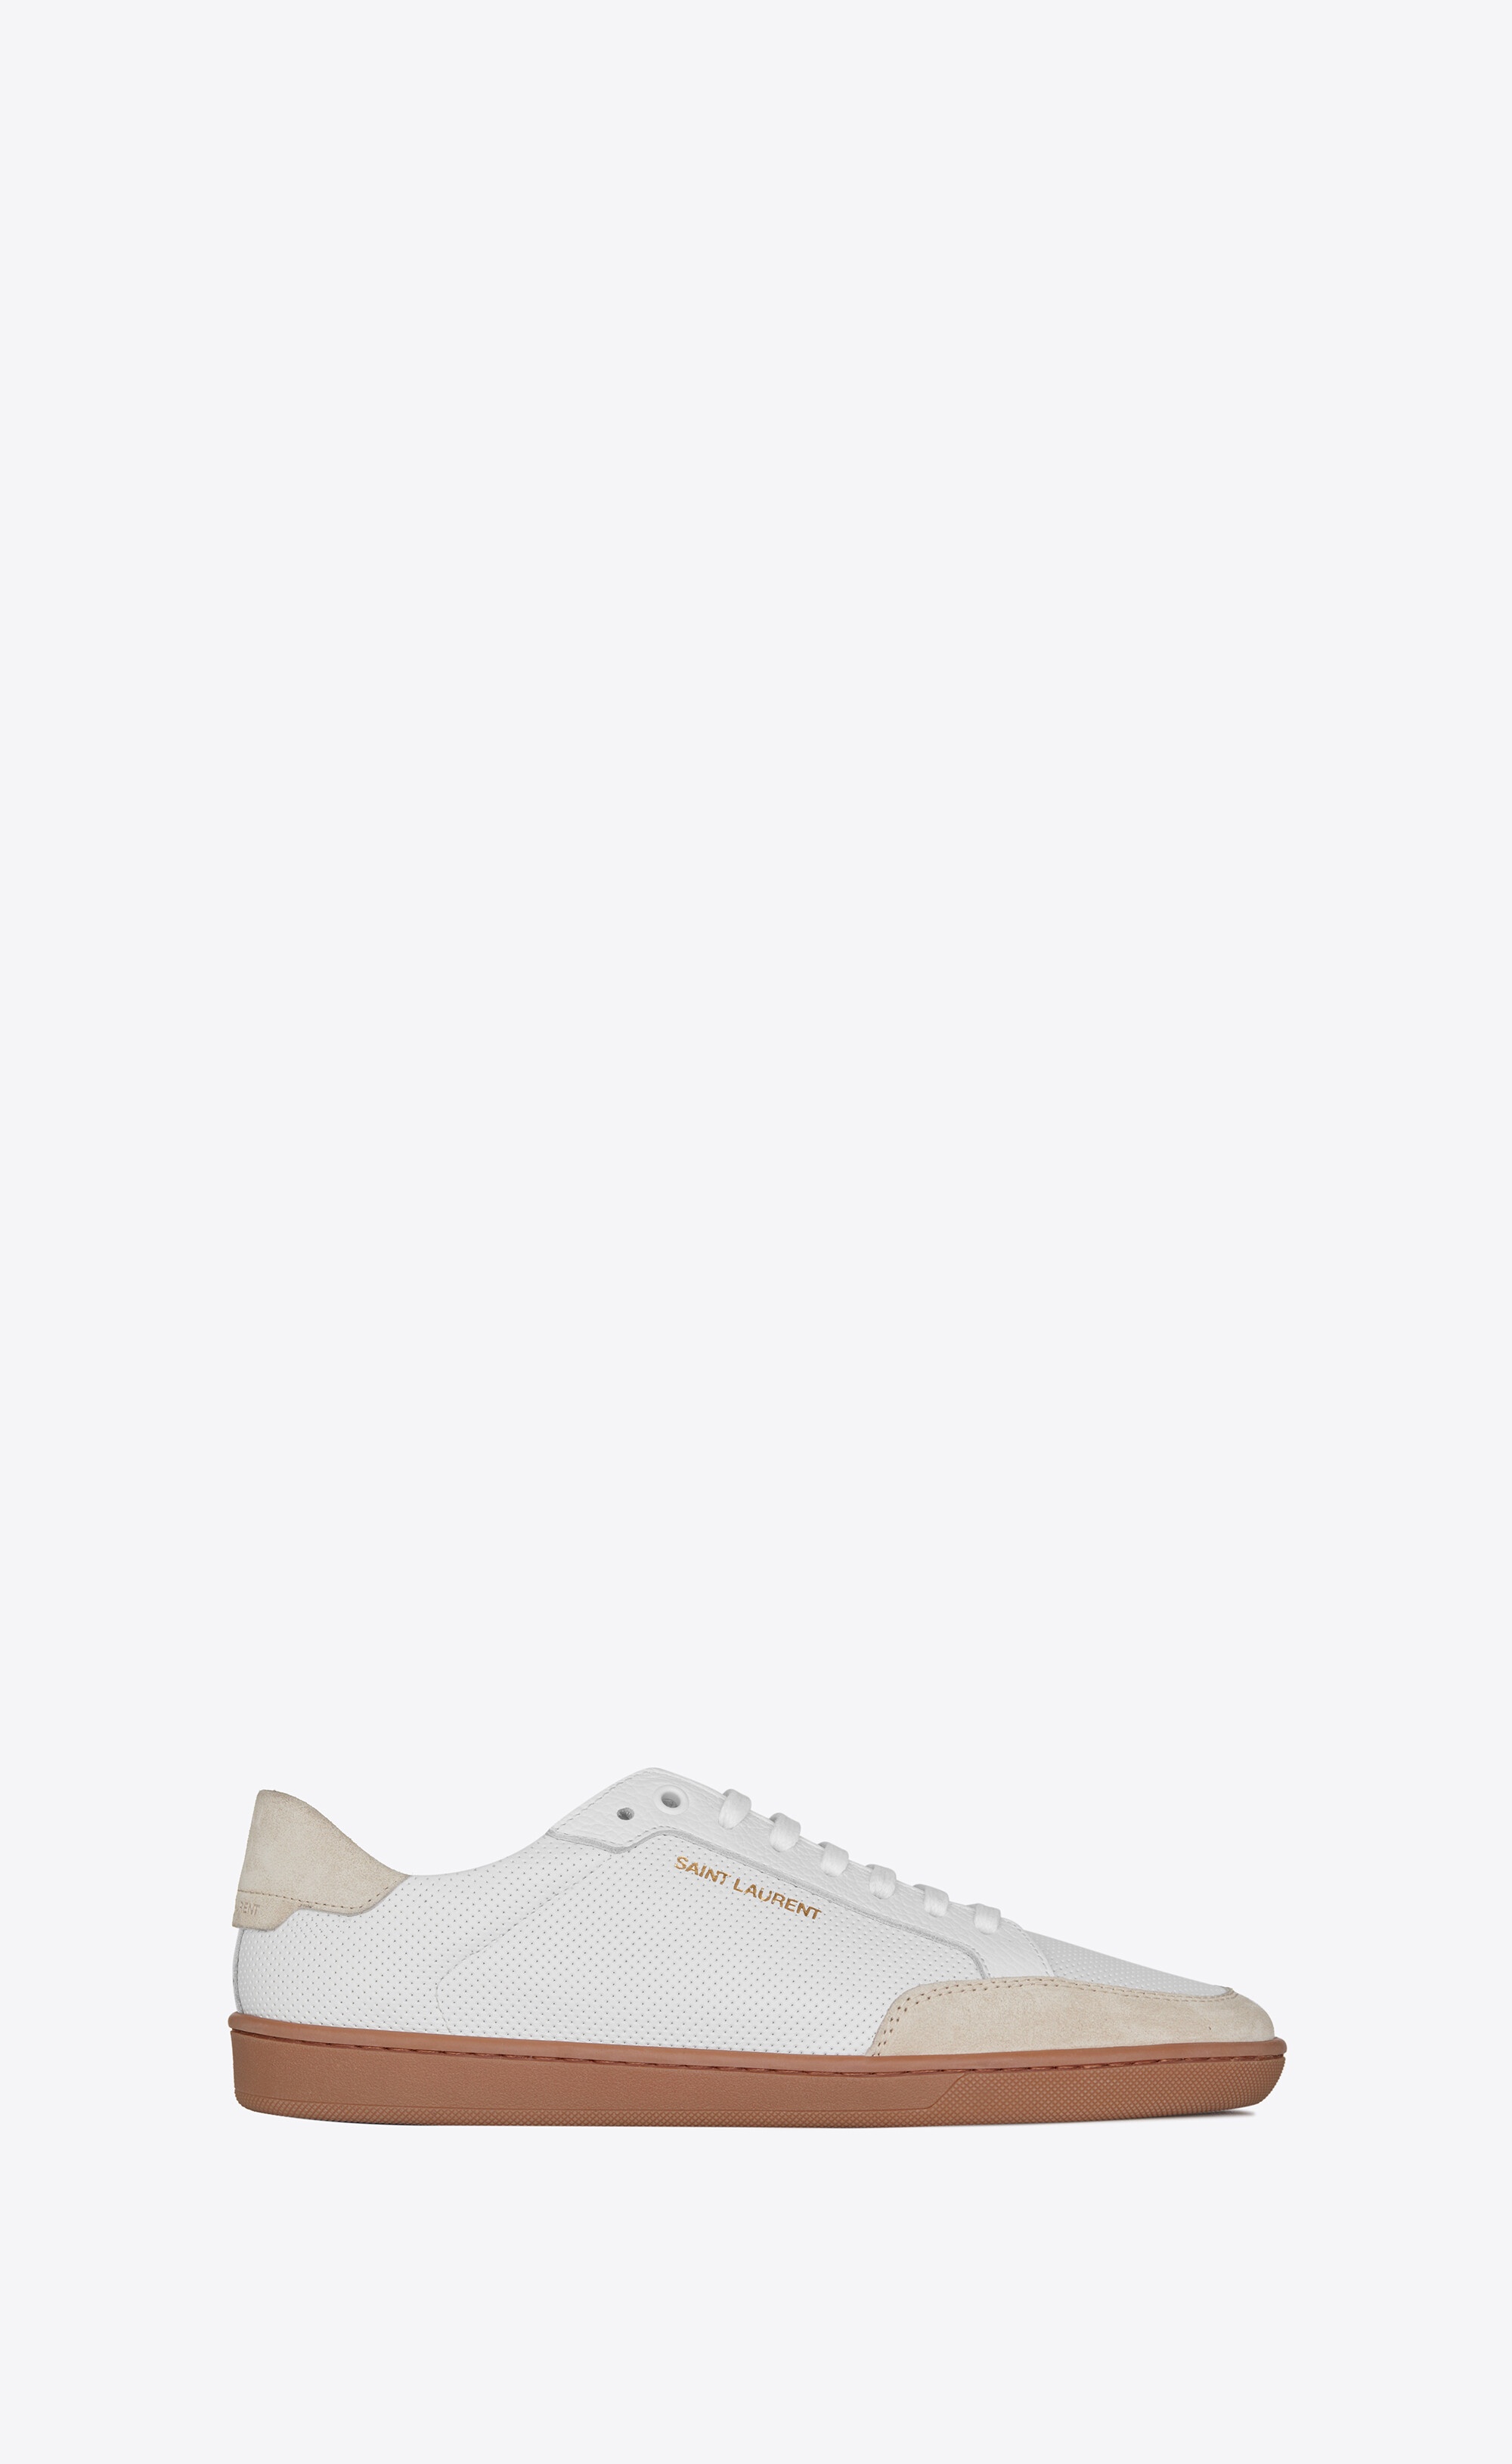 court classic sl/10 sneakers in perforated leather and suede - 1